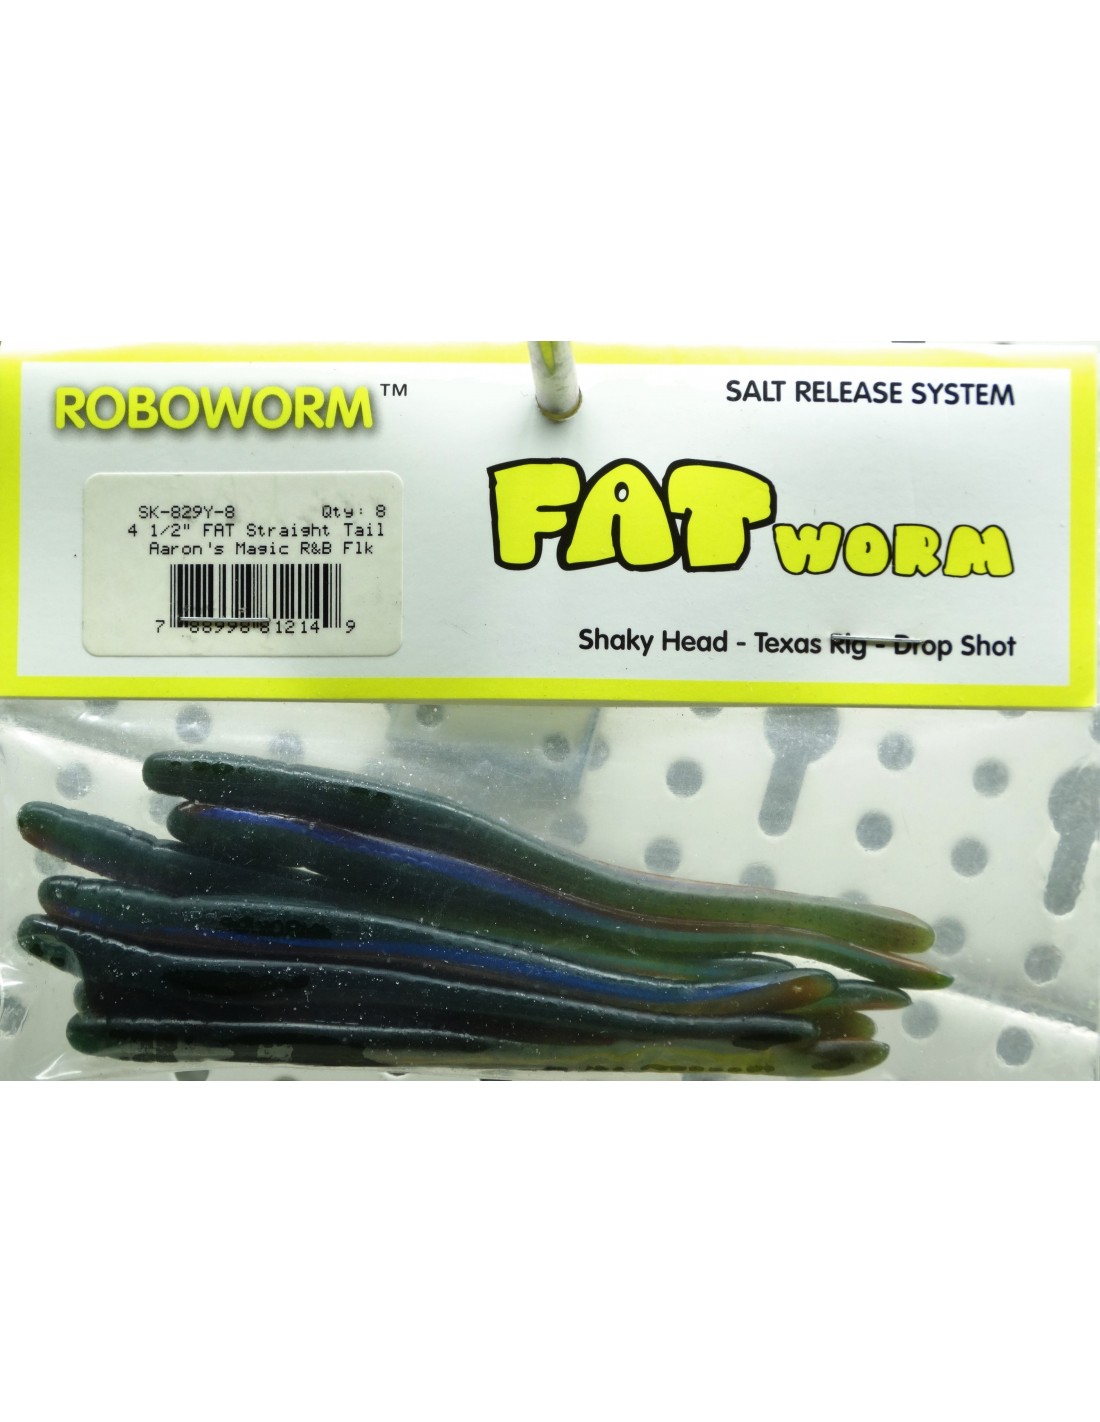 Roboworm 4 1/2” Straight Tail Aaron's Morning Dawn